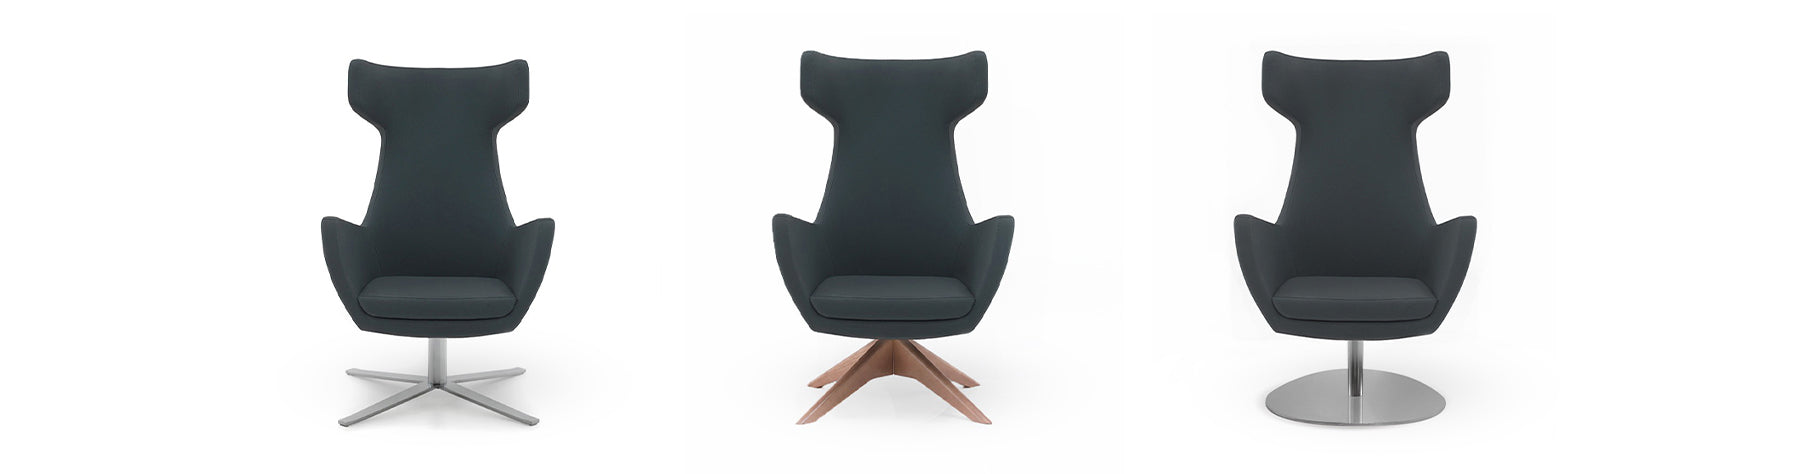 Chair Solutions Prestige L21 Stained Wood Base Chair